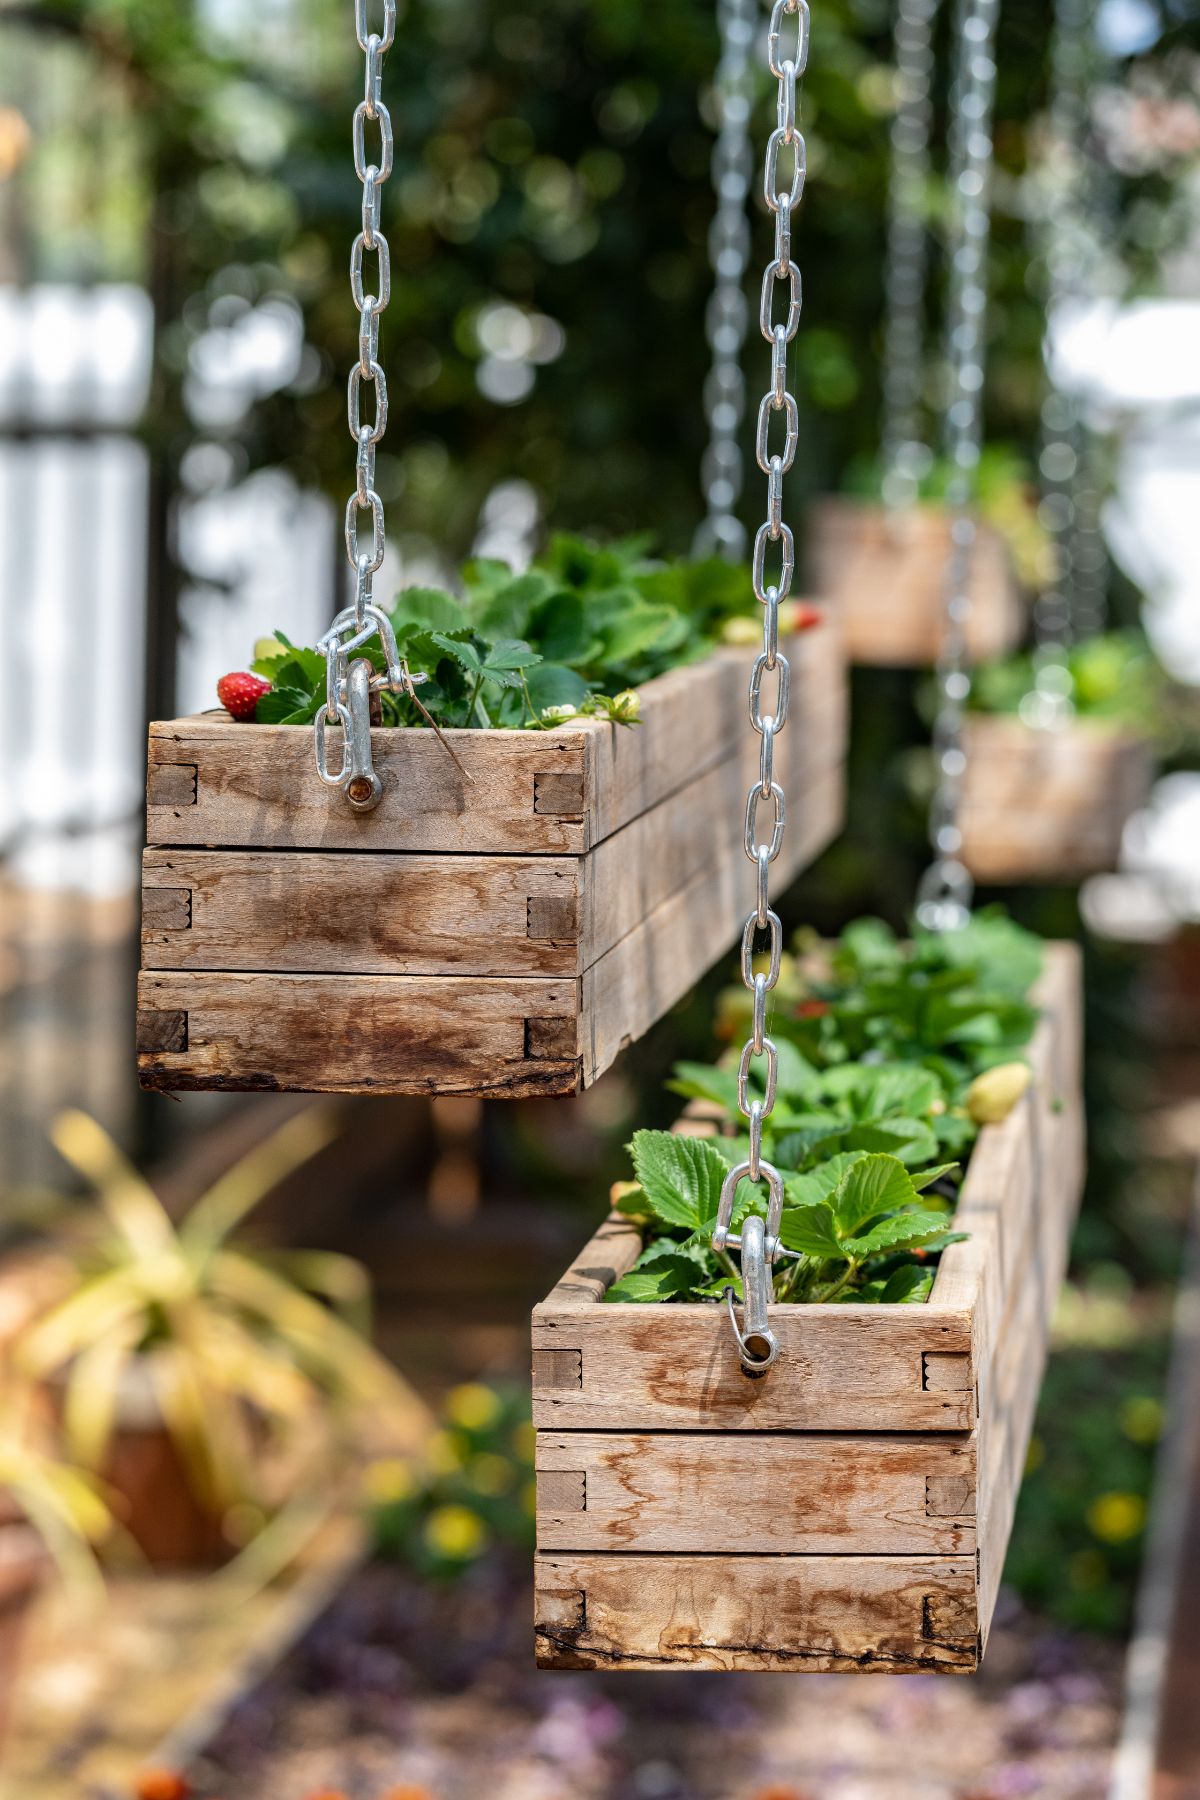 Long hanging wooden boxes planted with strawberry plants